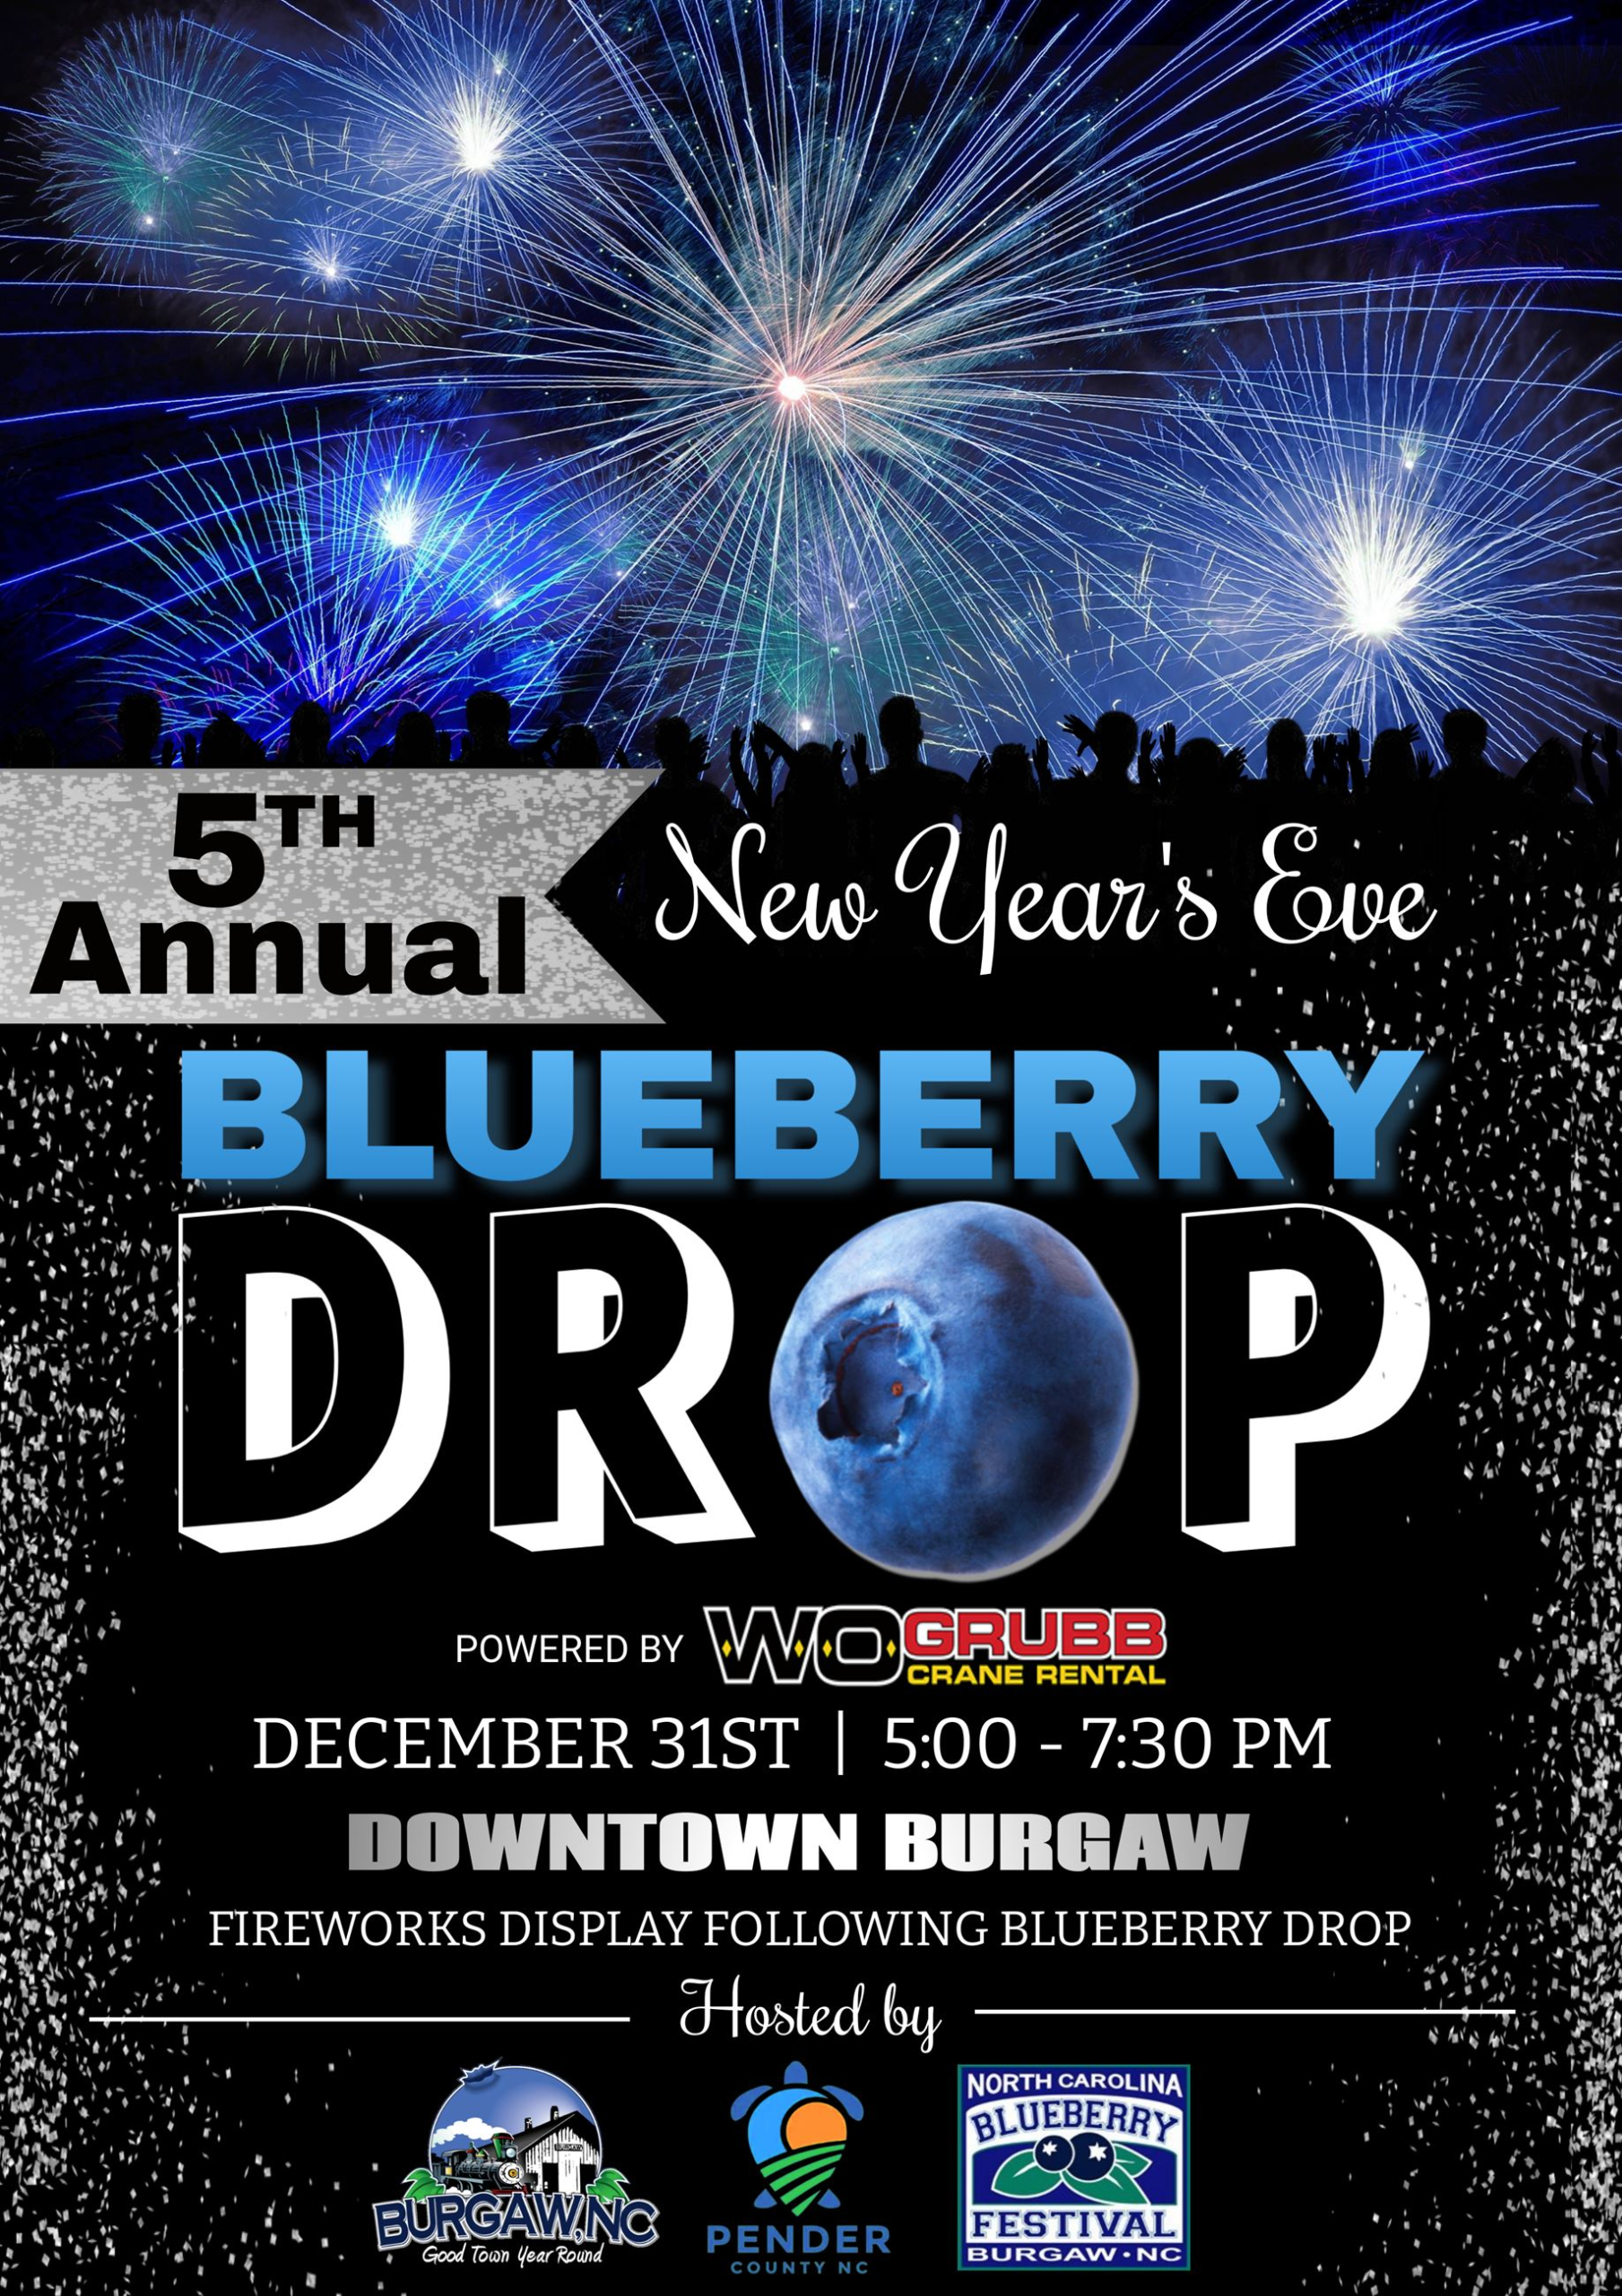 5th Annual New Year’s Eve Blueberry Drop